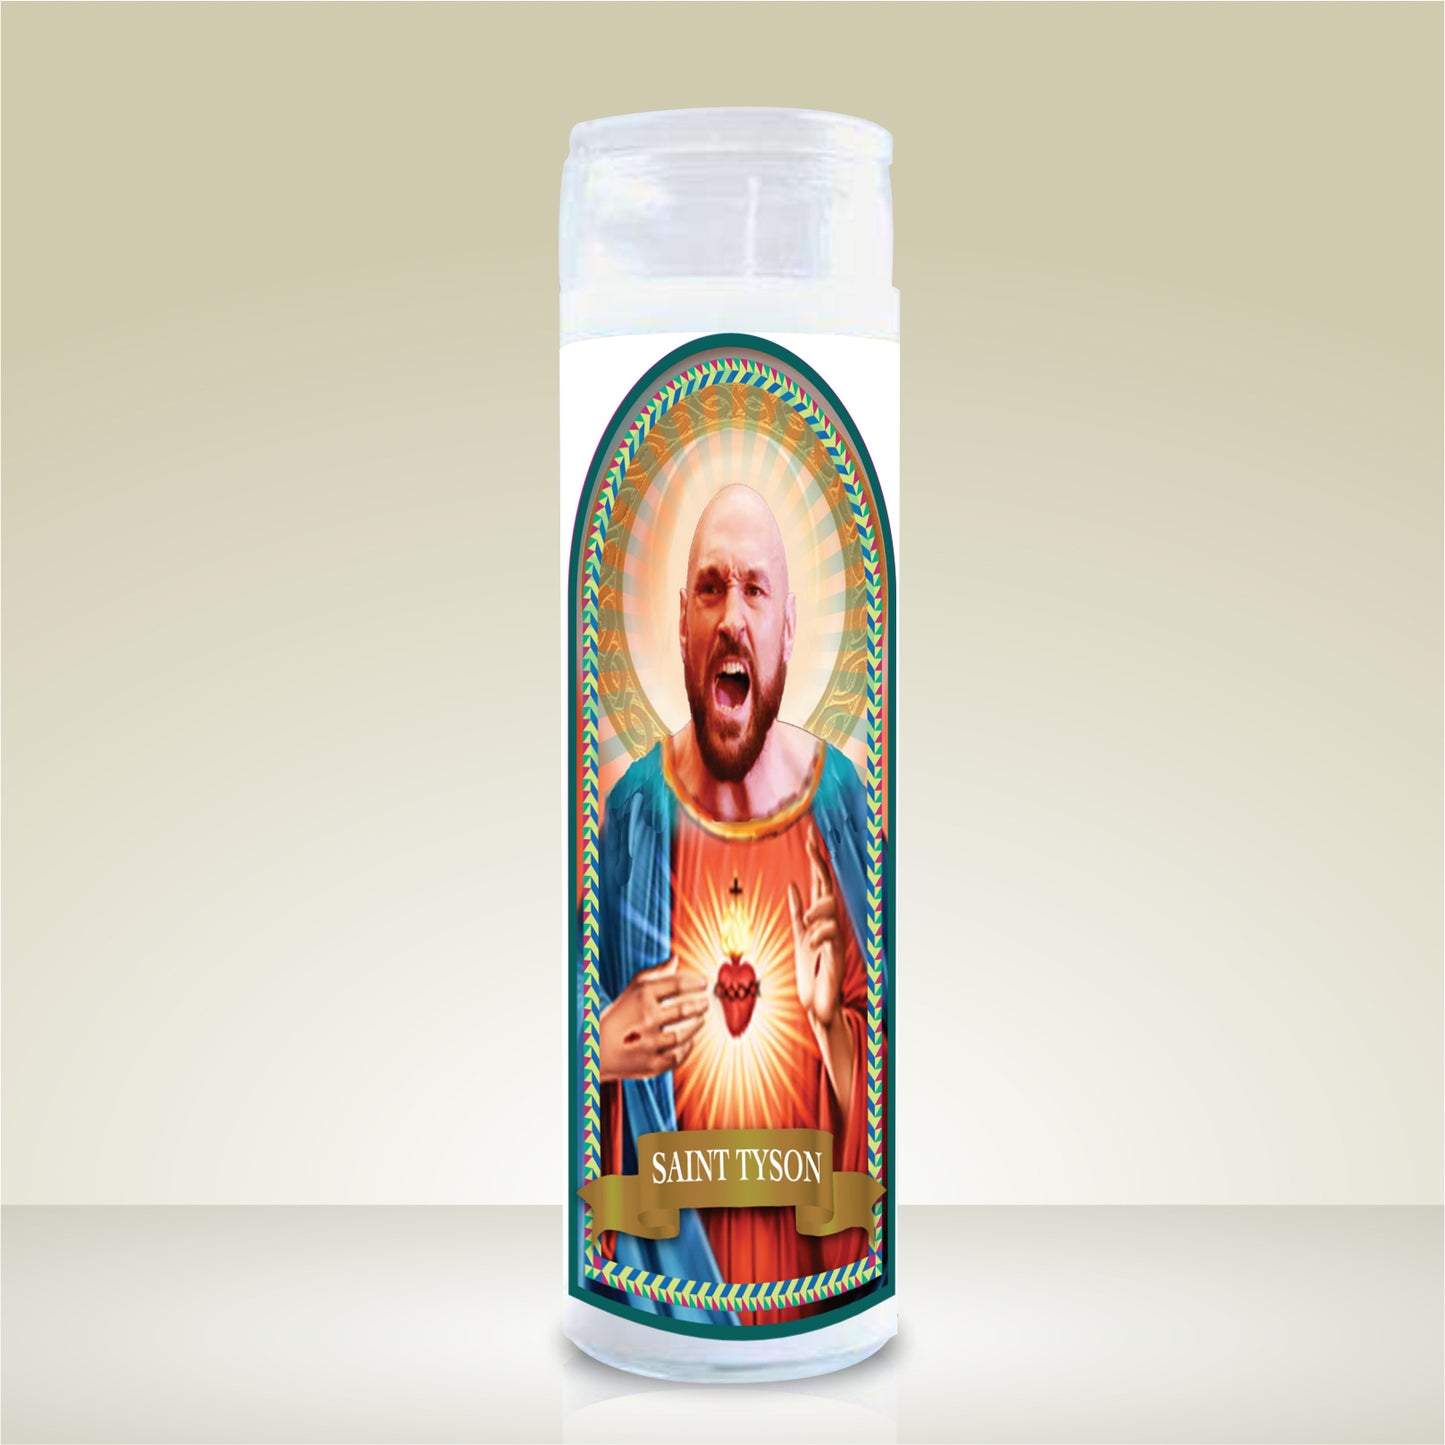 Tyson Fury Celebrity Prayer Candle. Buy 1, Get Another 1/2 Price